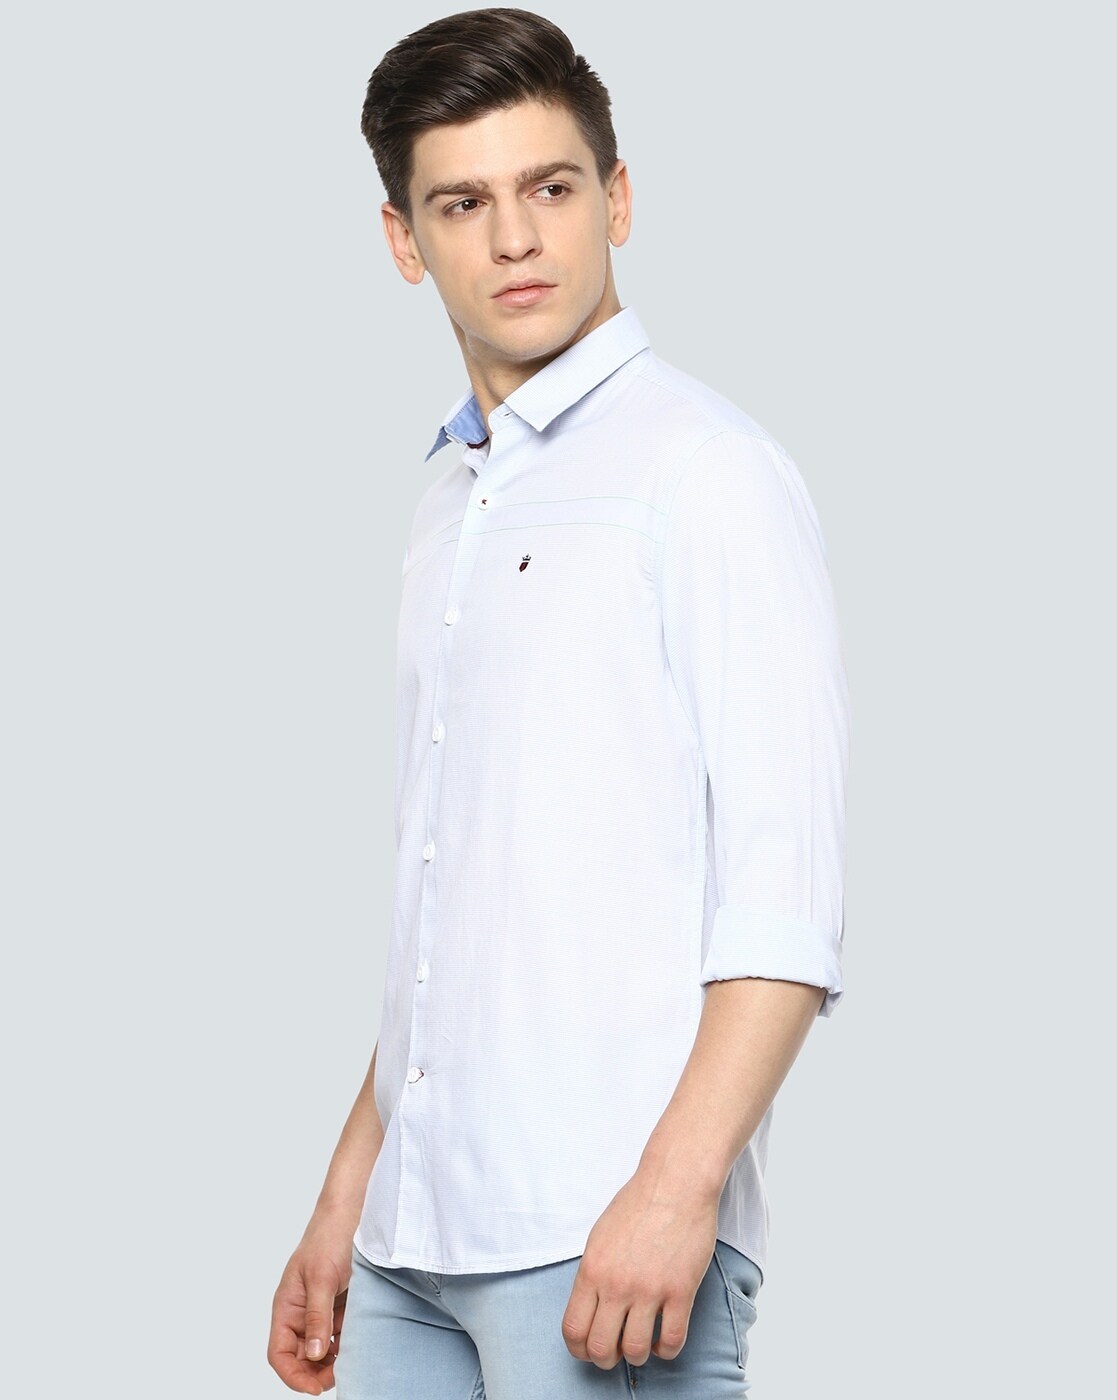 Louis Philippe (Sarath City Capital Mall) in Kothaguda,Hyderabad - Best Louis  Philippe-Casual Shirt Retailers in Hyderabad - Justdial